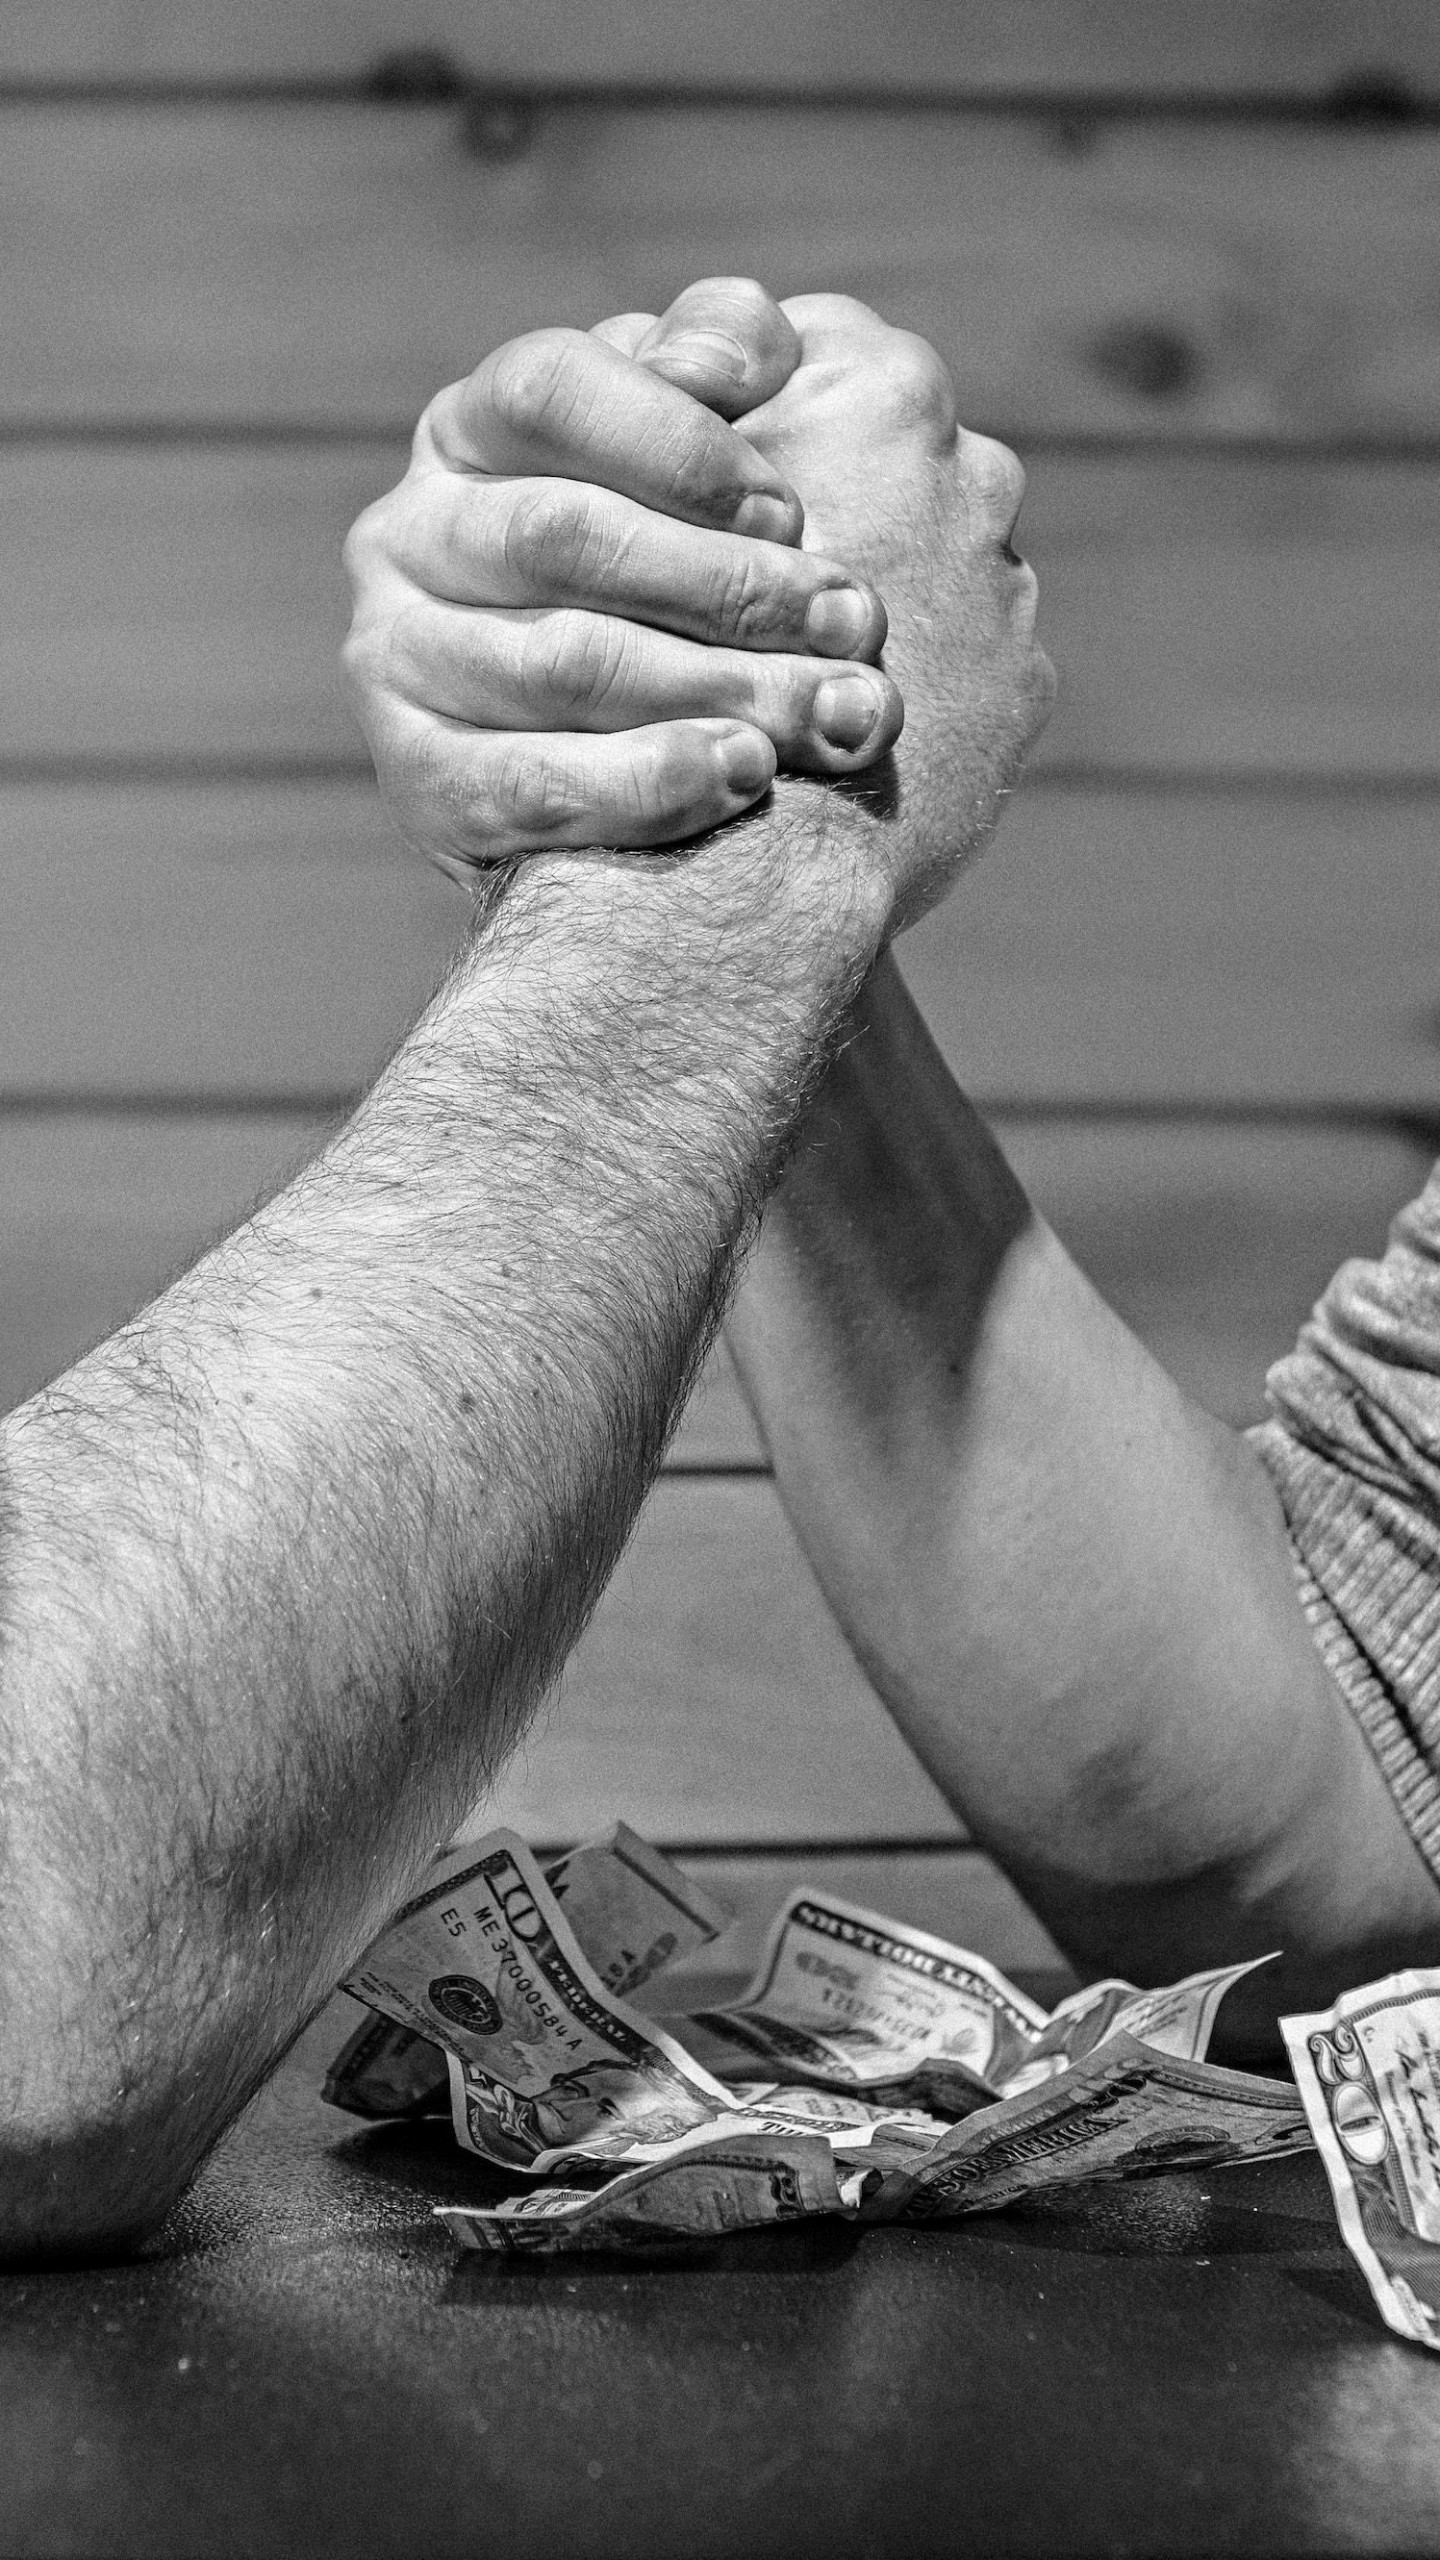 Arm Wrestling Wallpaper for SAMSUNG Galaxy Note 4